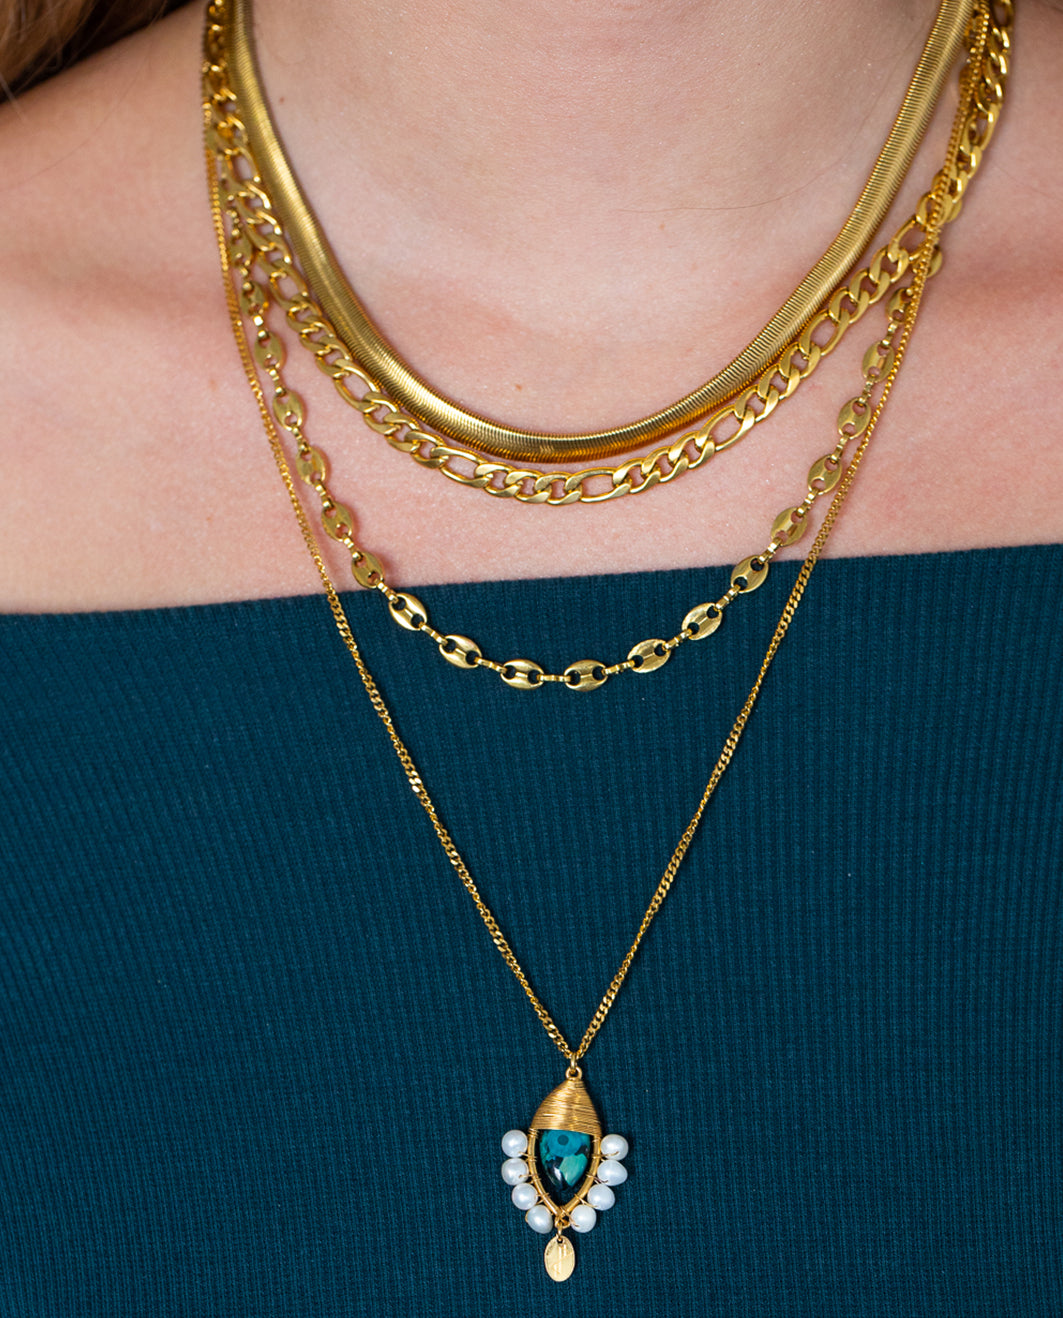 Chic Snake Chain Necklace